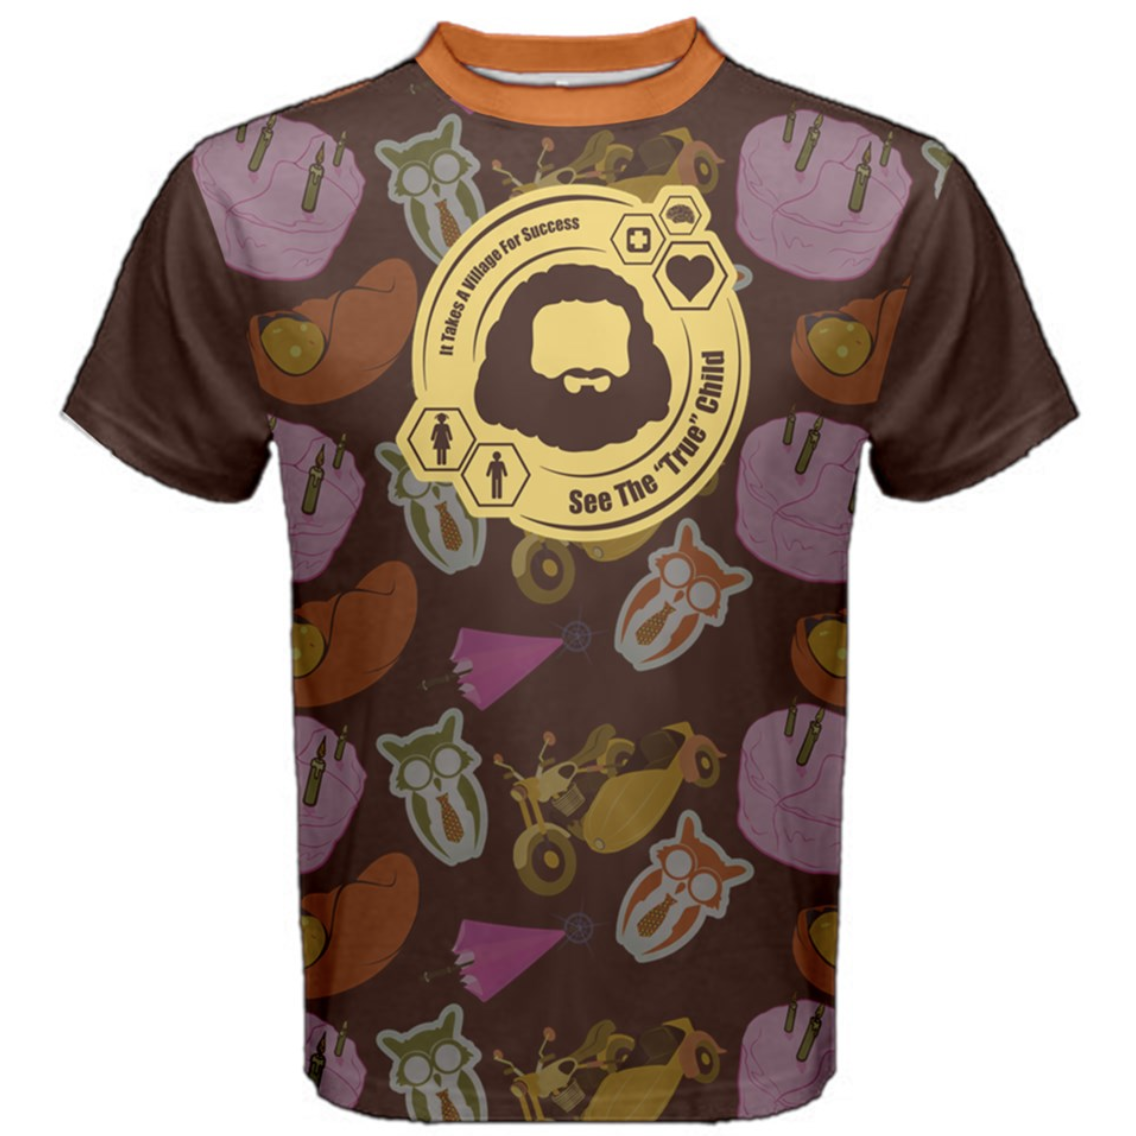 See The "TRUE" Child (Brown Patterned) Cotton Tee - Inspired by Literary Character, Hagrid